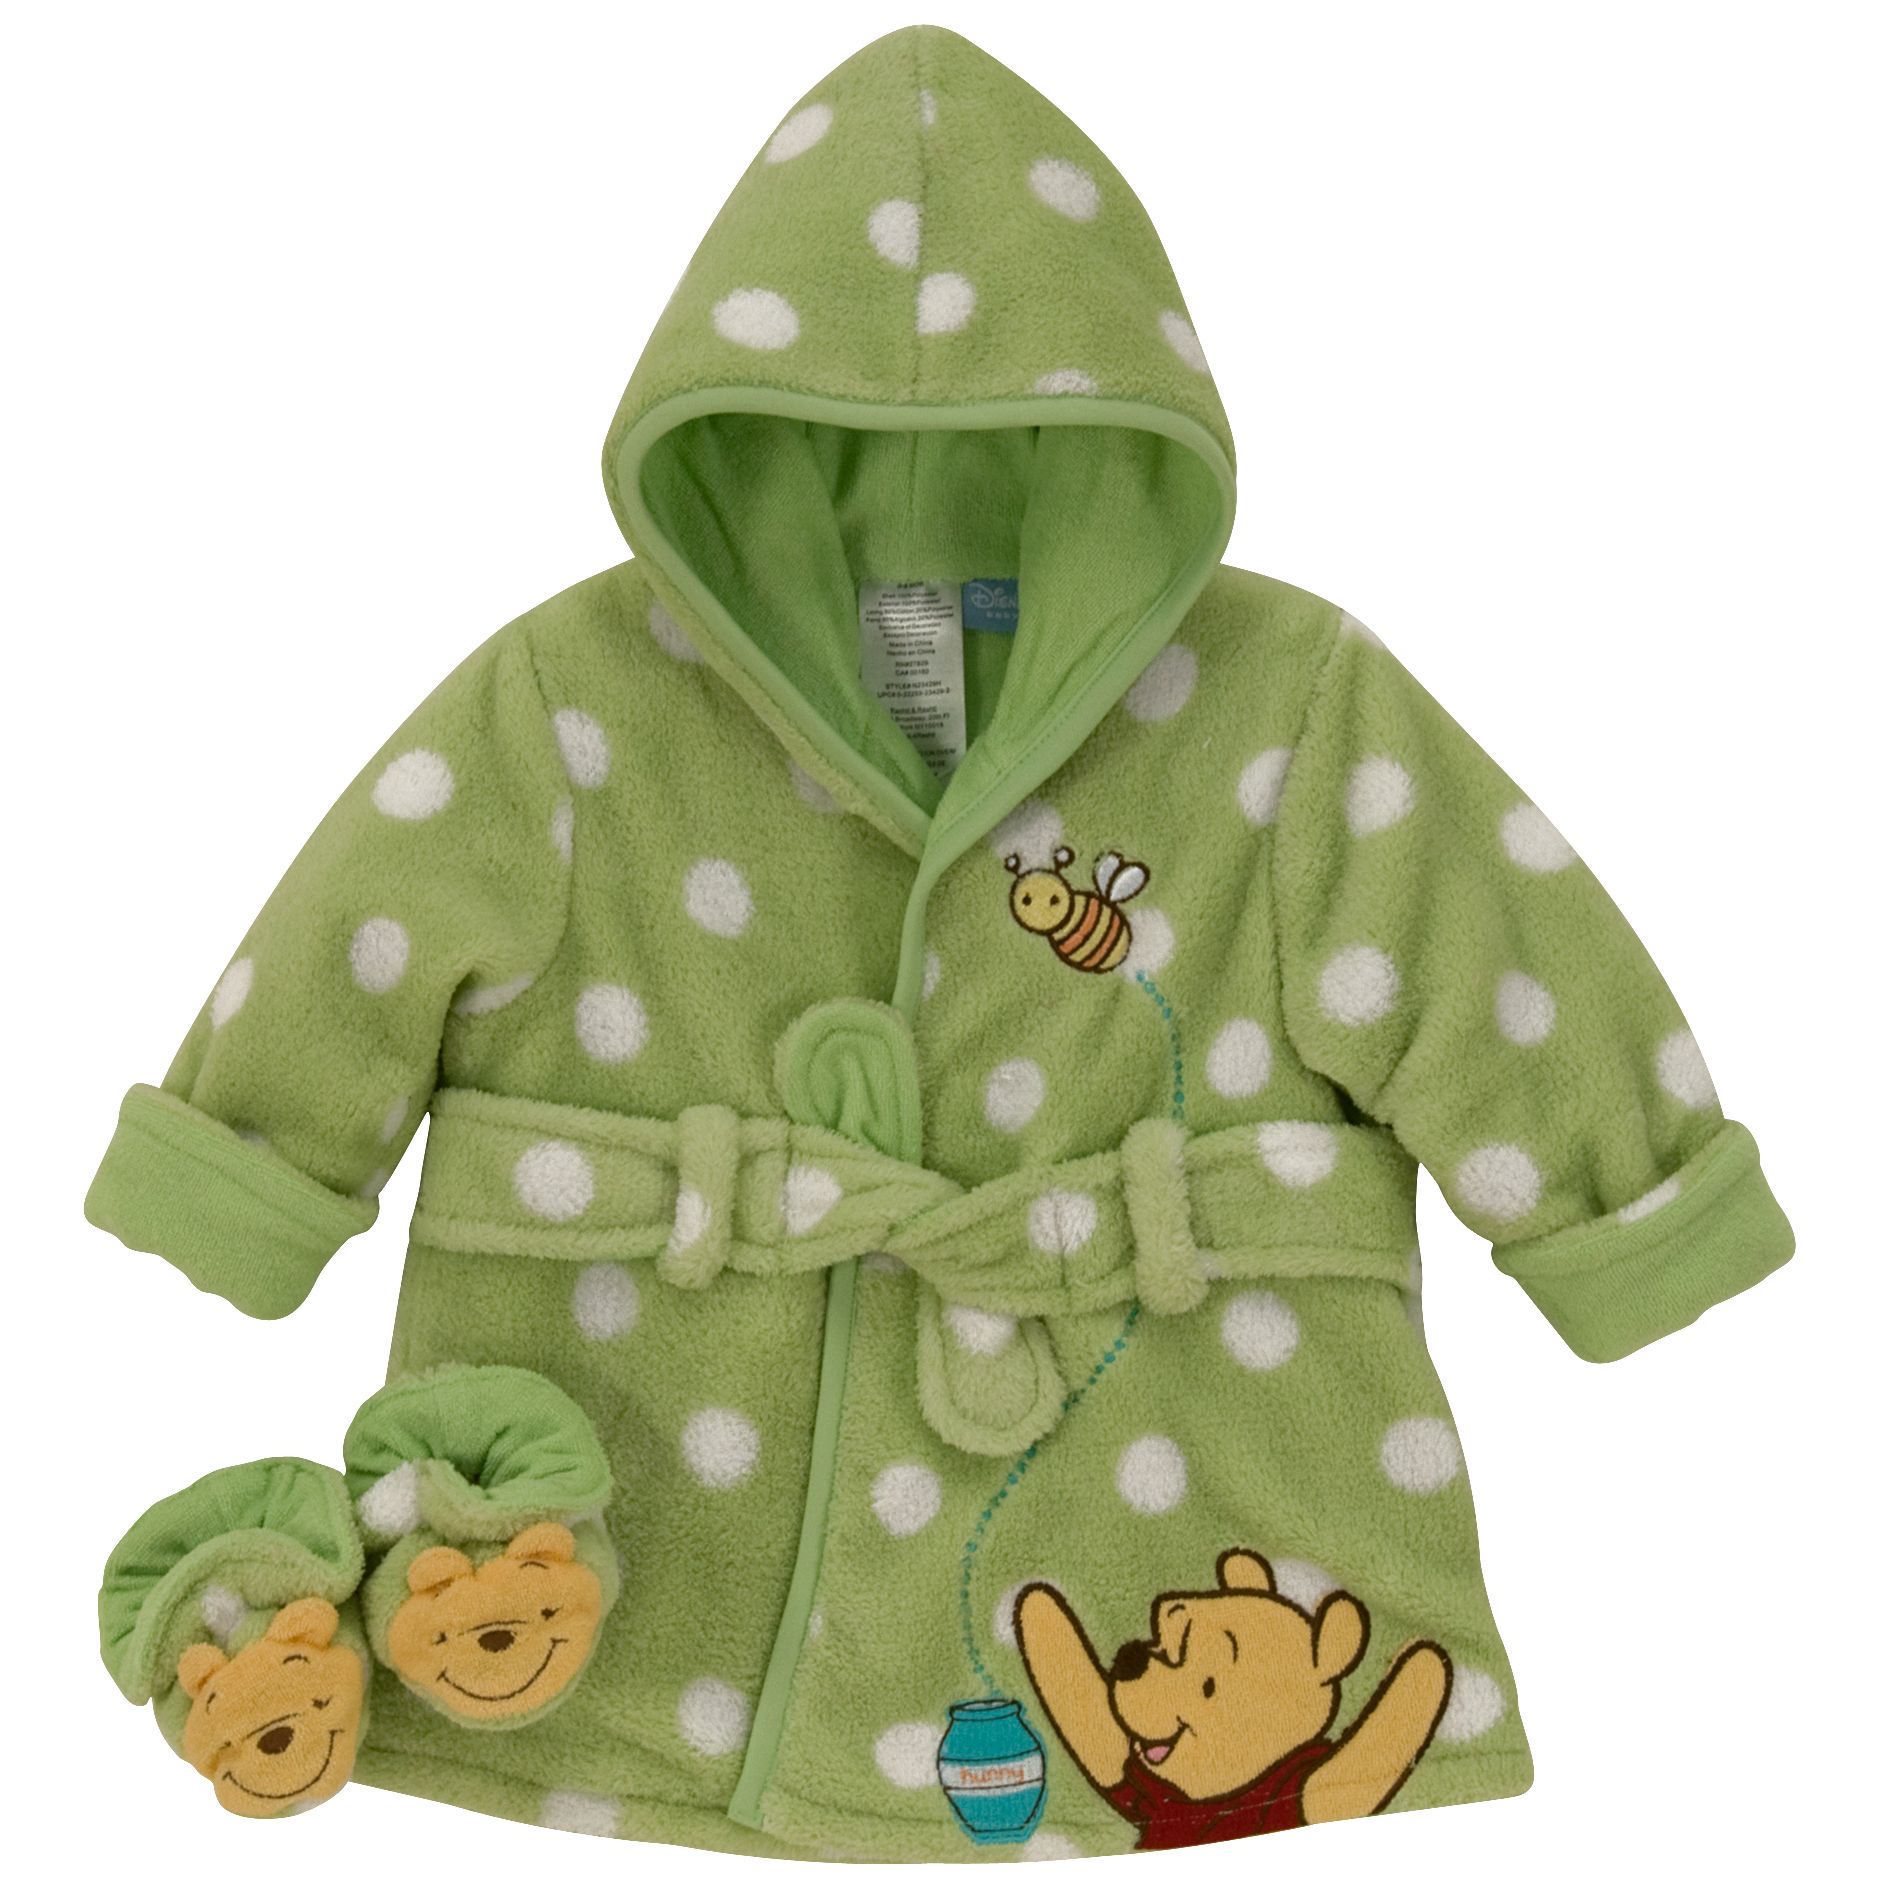 Winnie the Pooh Robe and Slippers Gift Set, Neutral